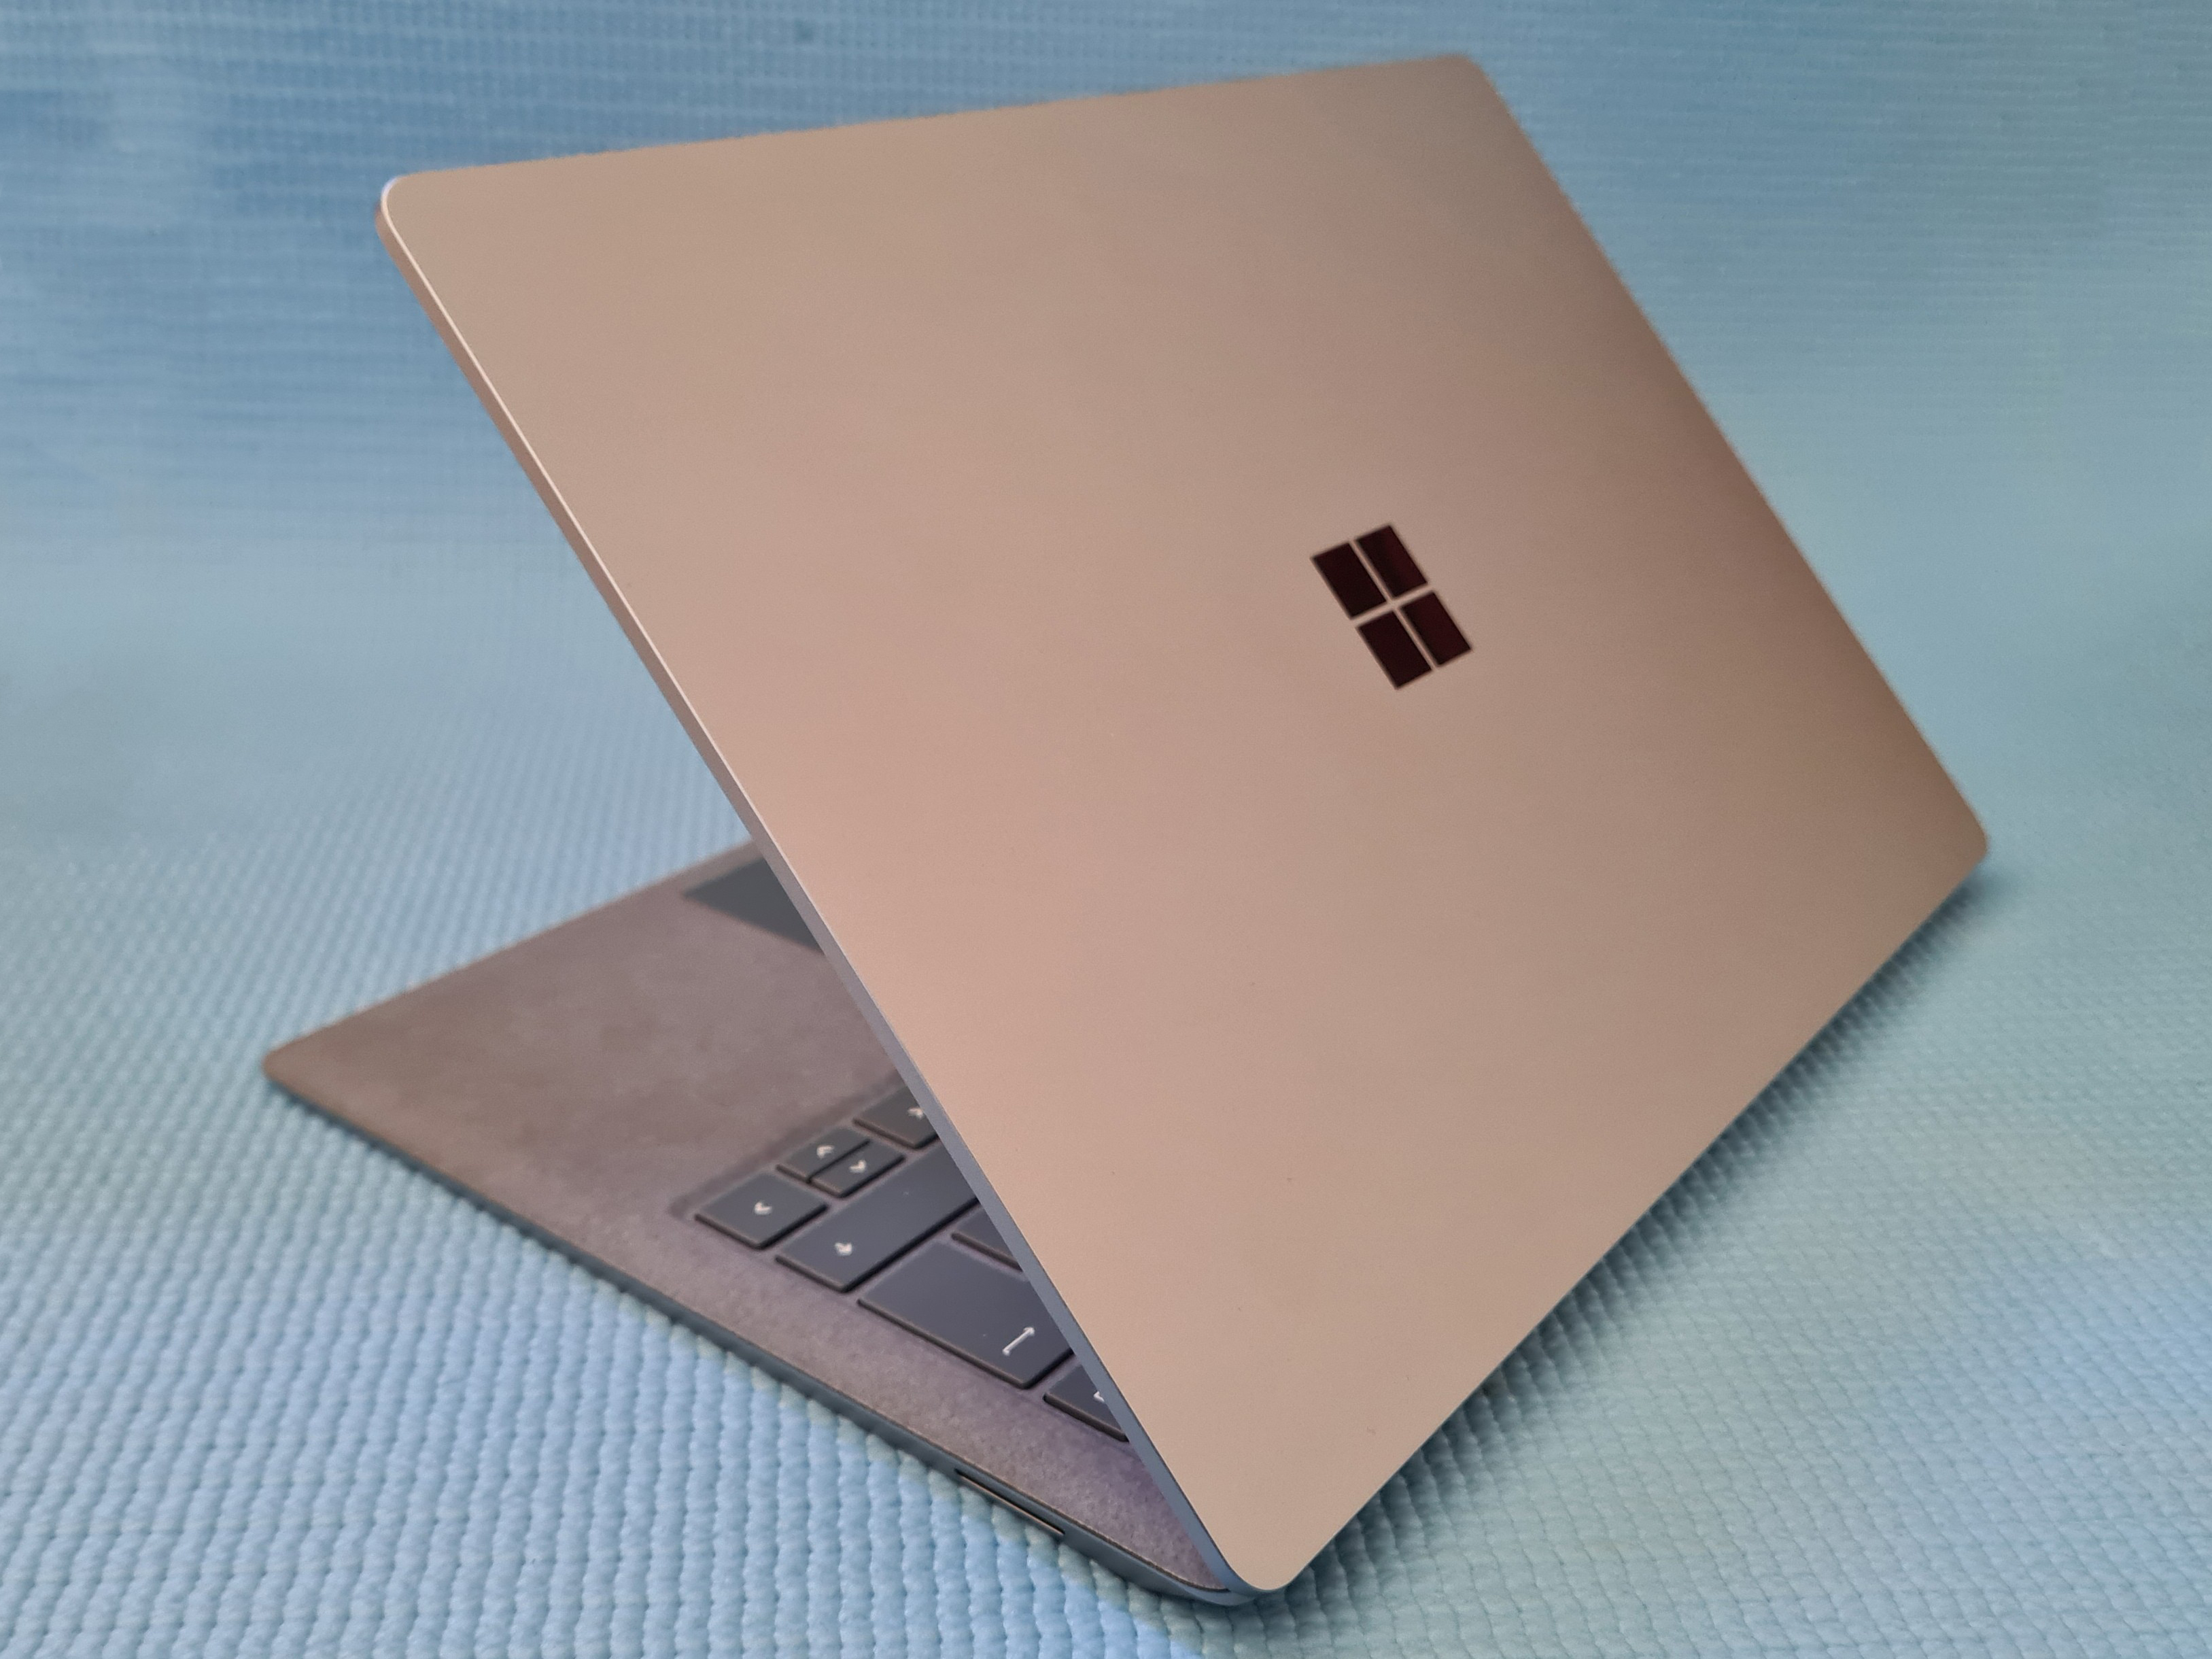 Microsoft Surface Laptop 4 (13-inch) review